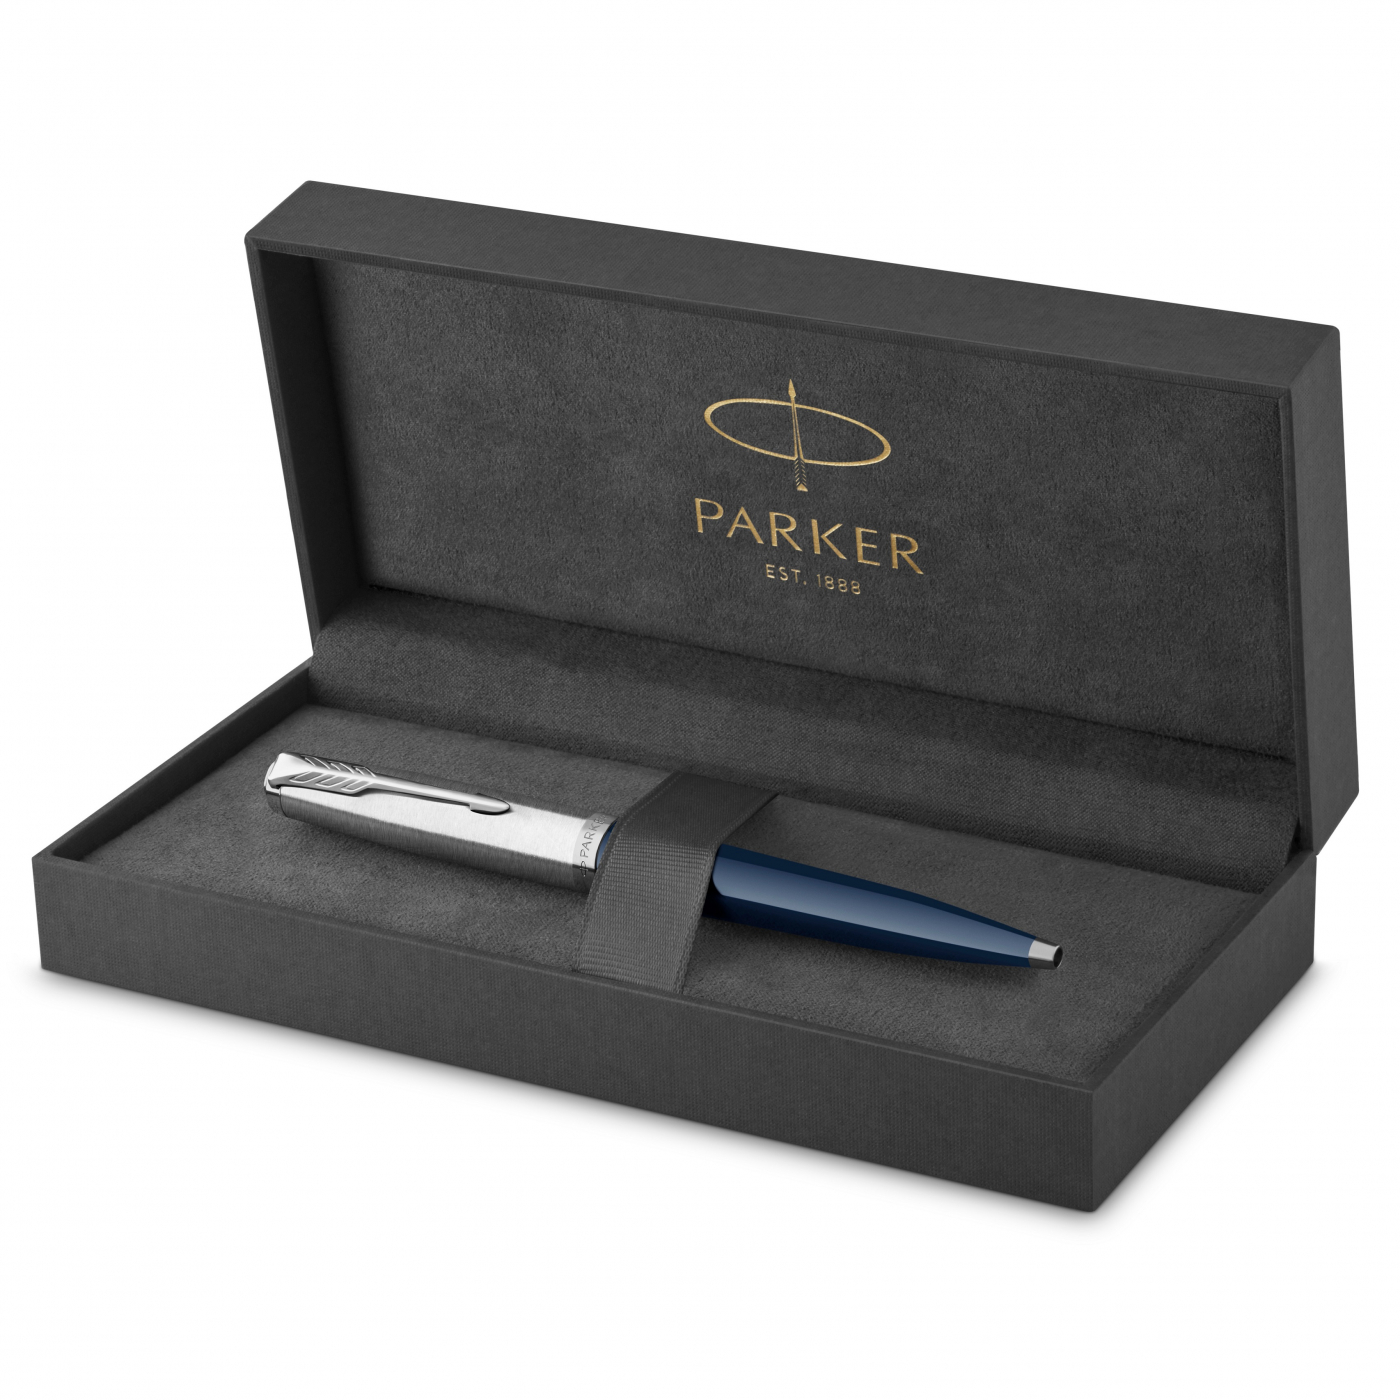 Parker Profile Ball Pen Matte Silver New Sealed Original Blue ink Free Shipping 